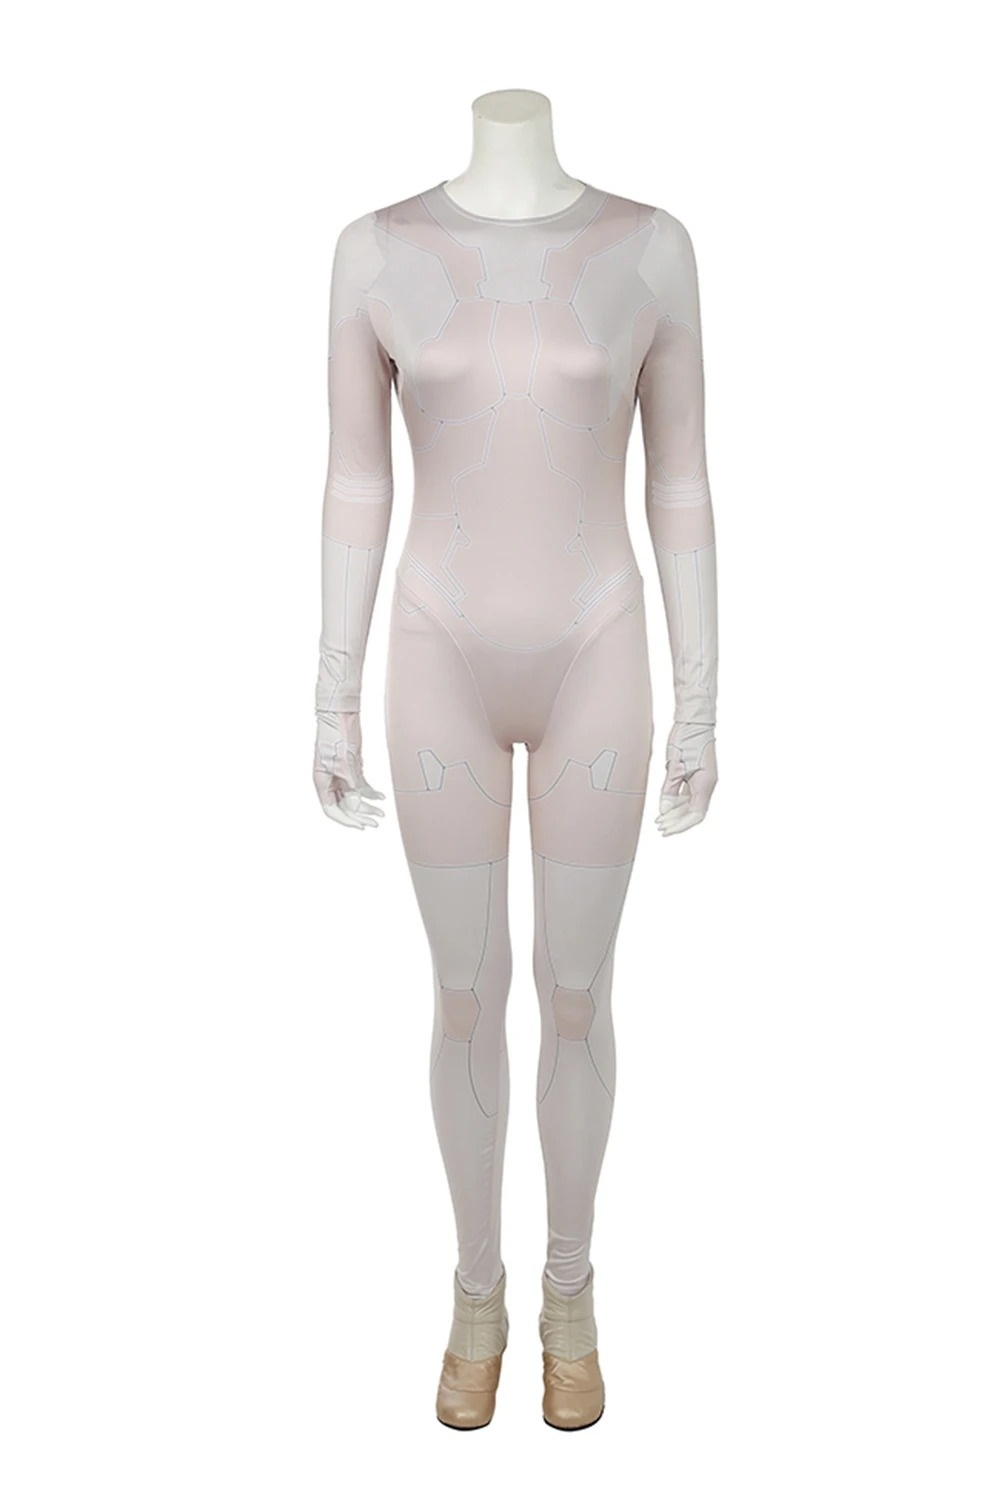 Ghost In The Shell Movie Major Jumpsuit Cosplay Costume